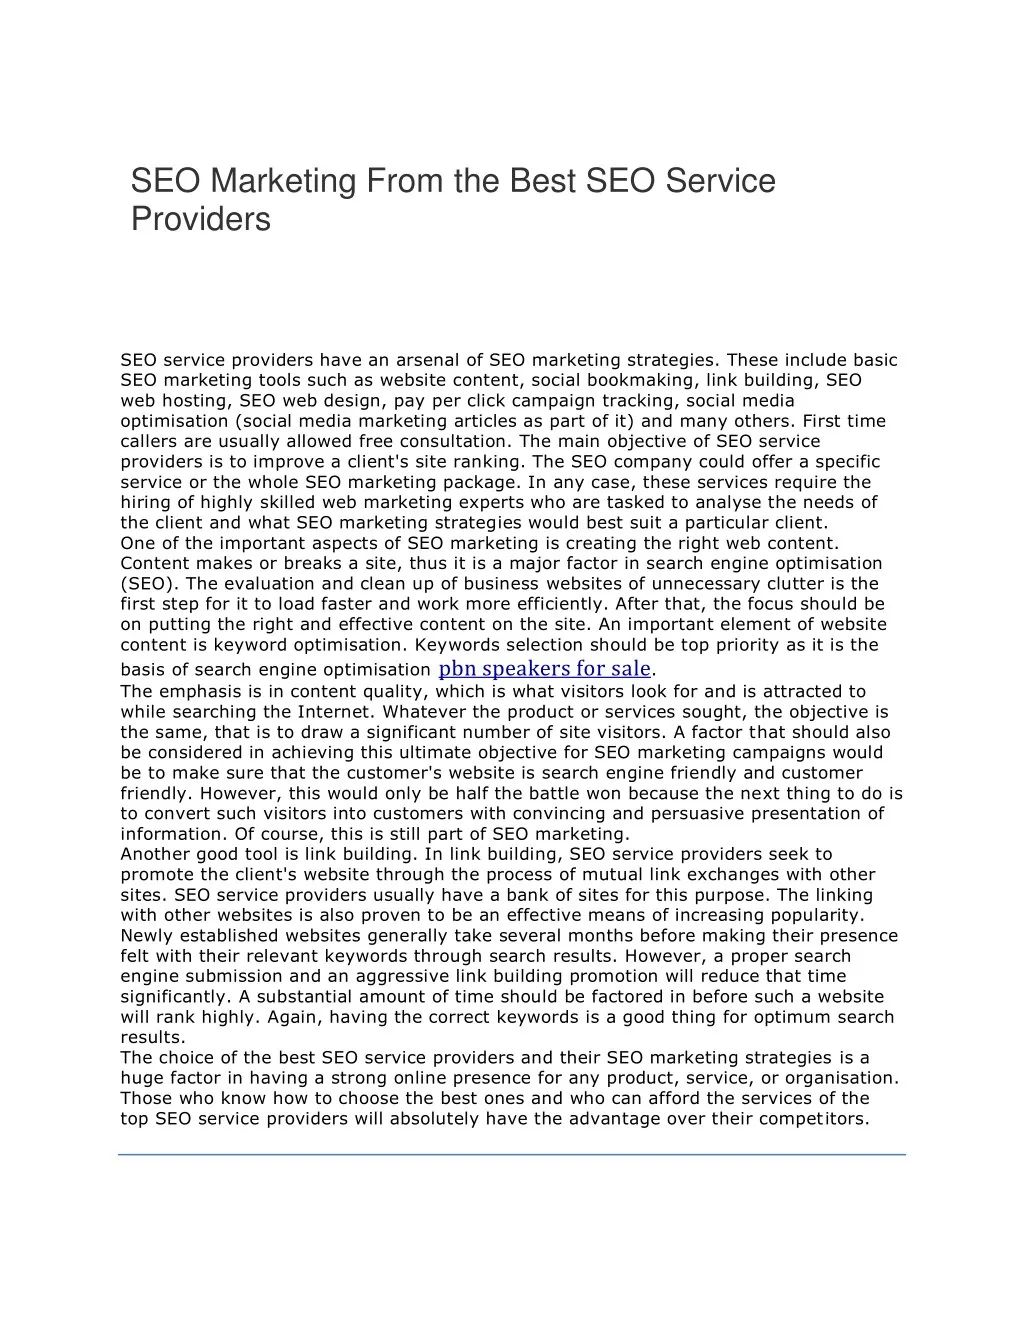 seo marketing from the best seo service providers